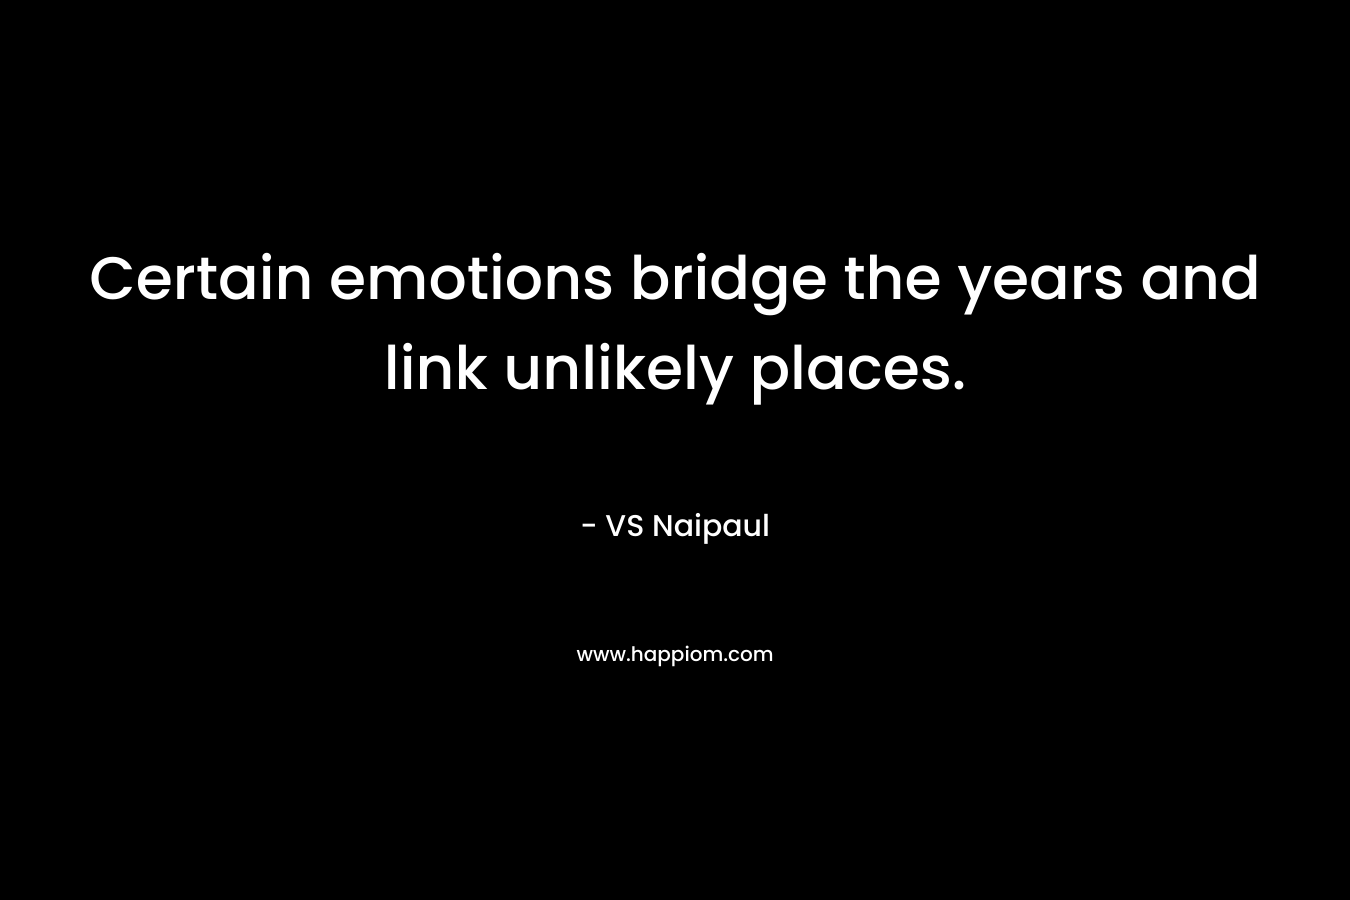 Certain emotions bridge the years and link unlikely places. – VS Naipaul